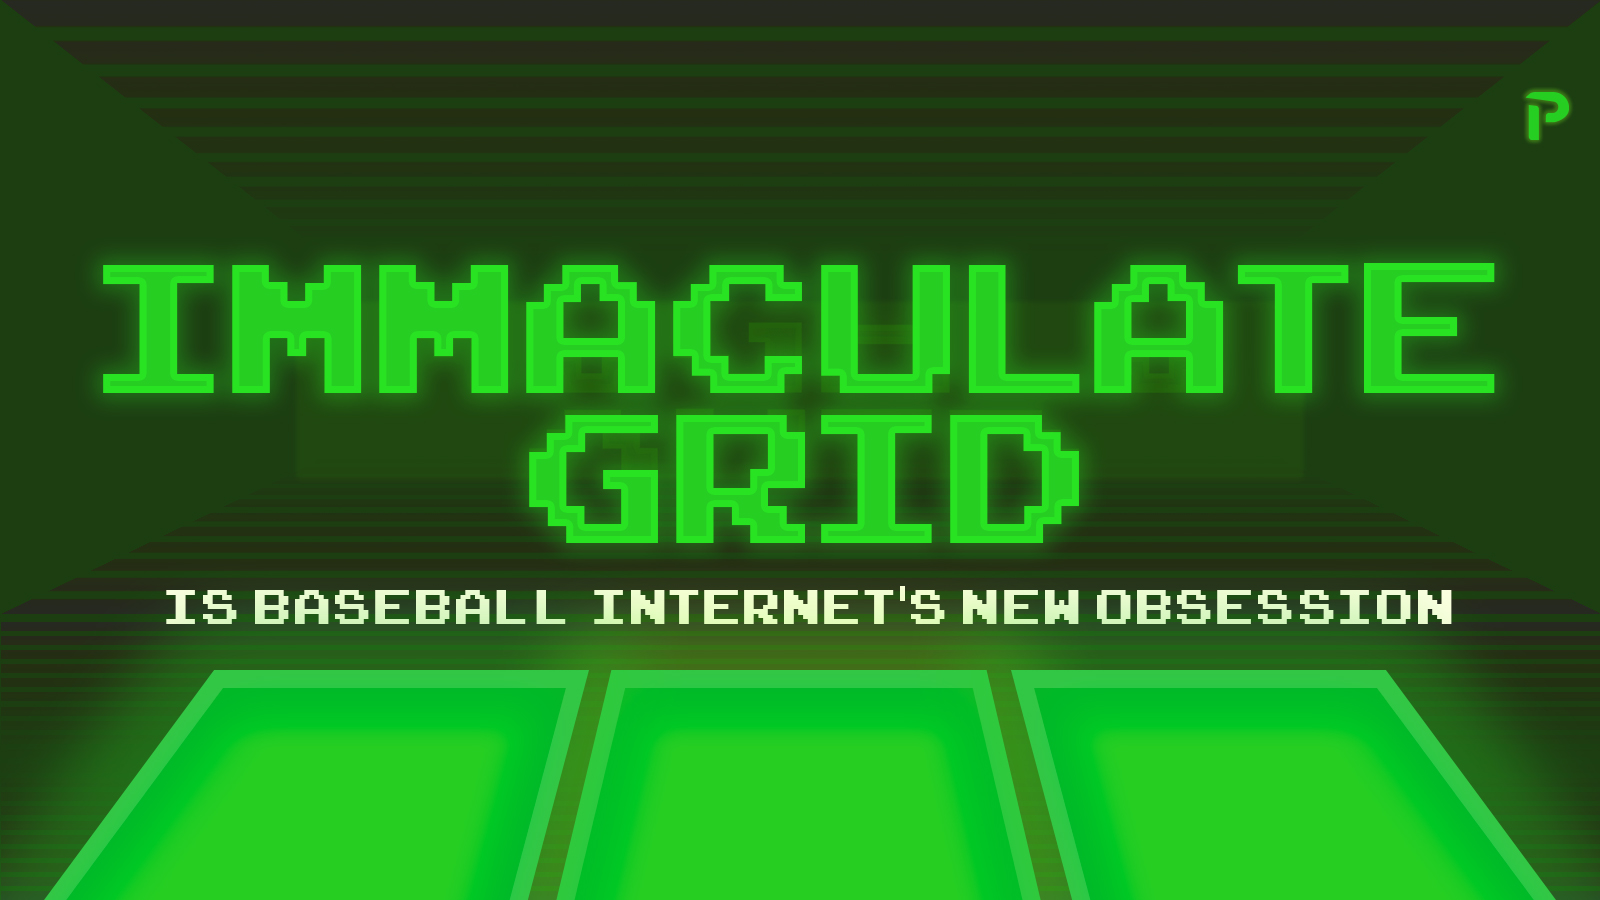 Which players have played for both Rockies and Athletics in their careers?  MLB Immaculate Grid answers for July 13